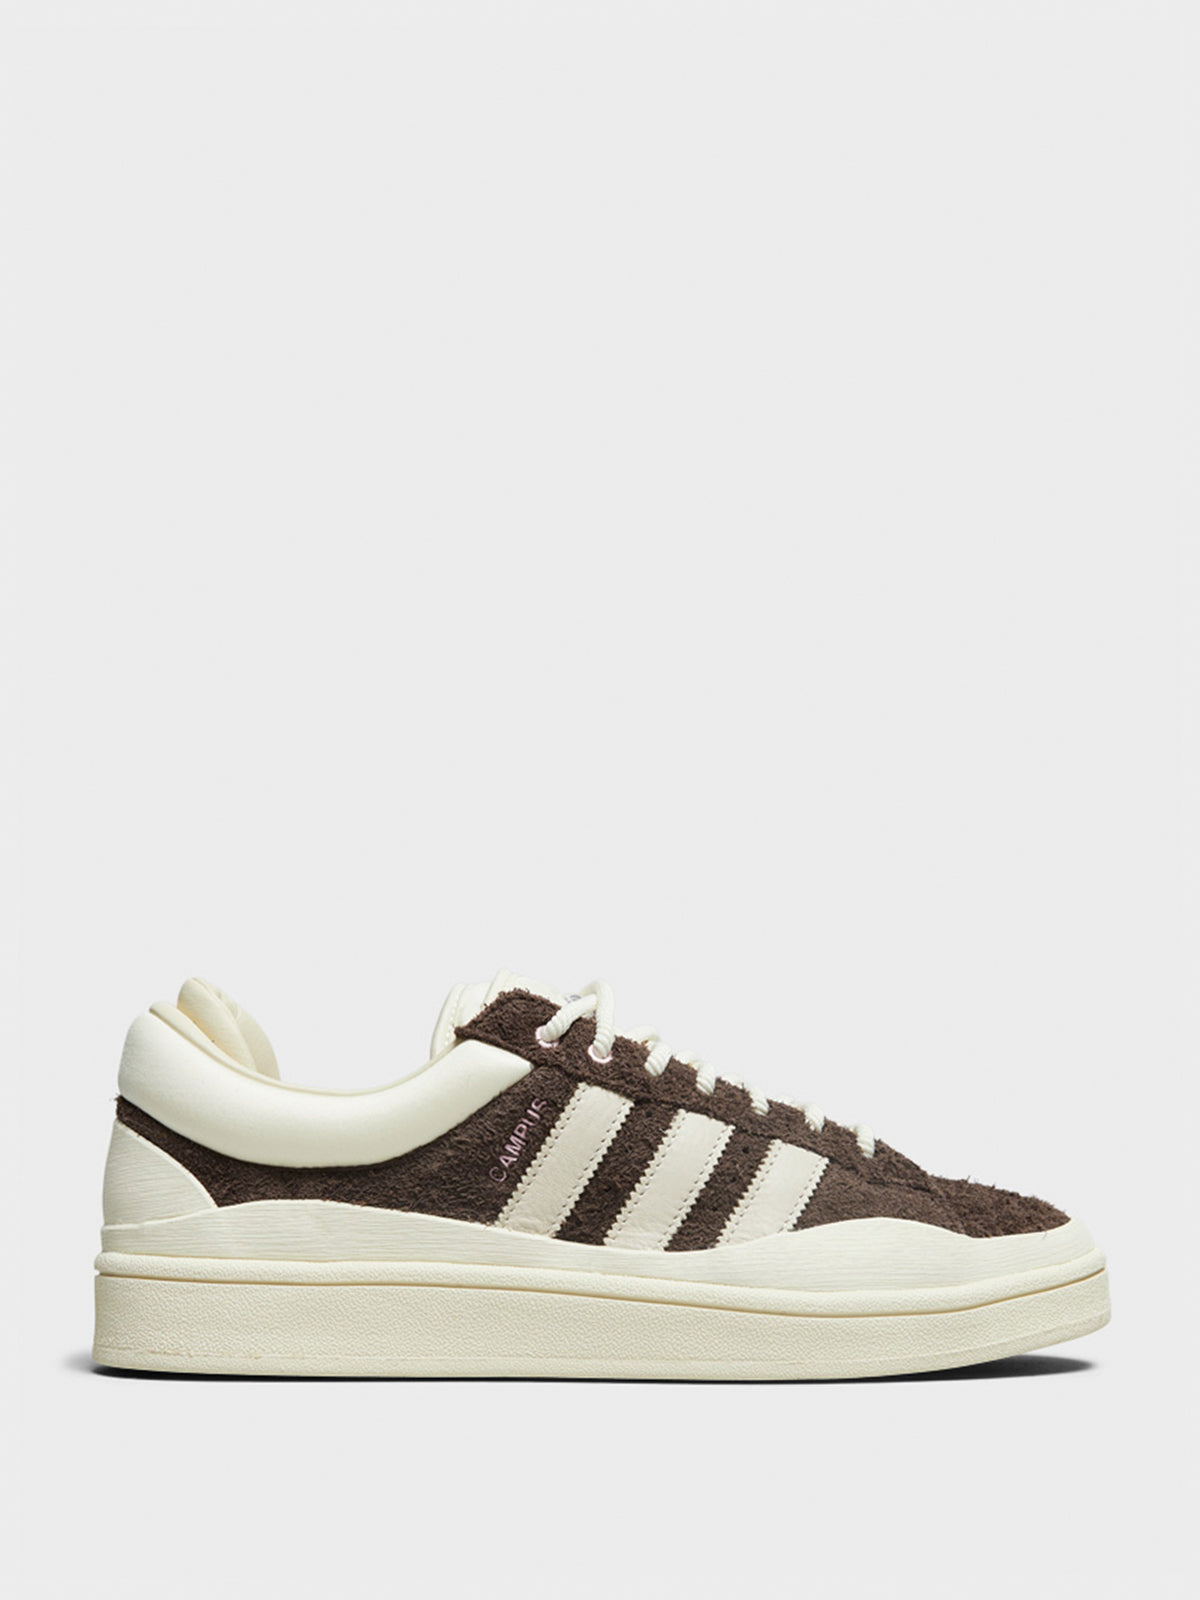 Bad Bunny Last Campus Sneakers in Brown and White